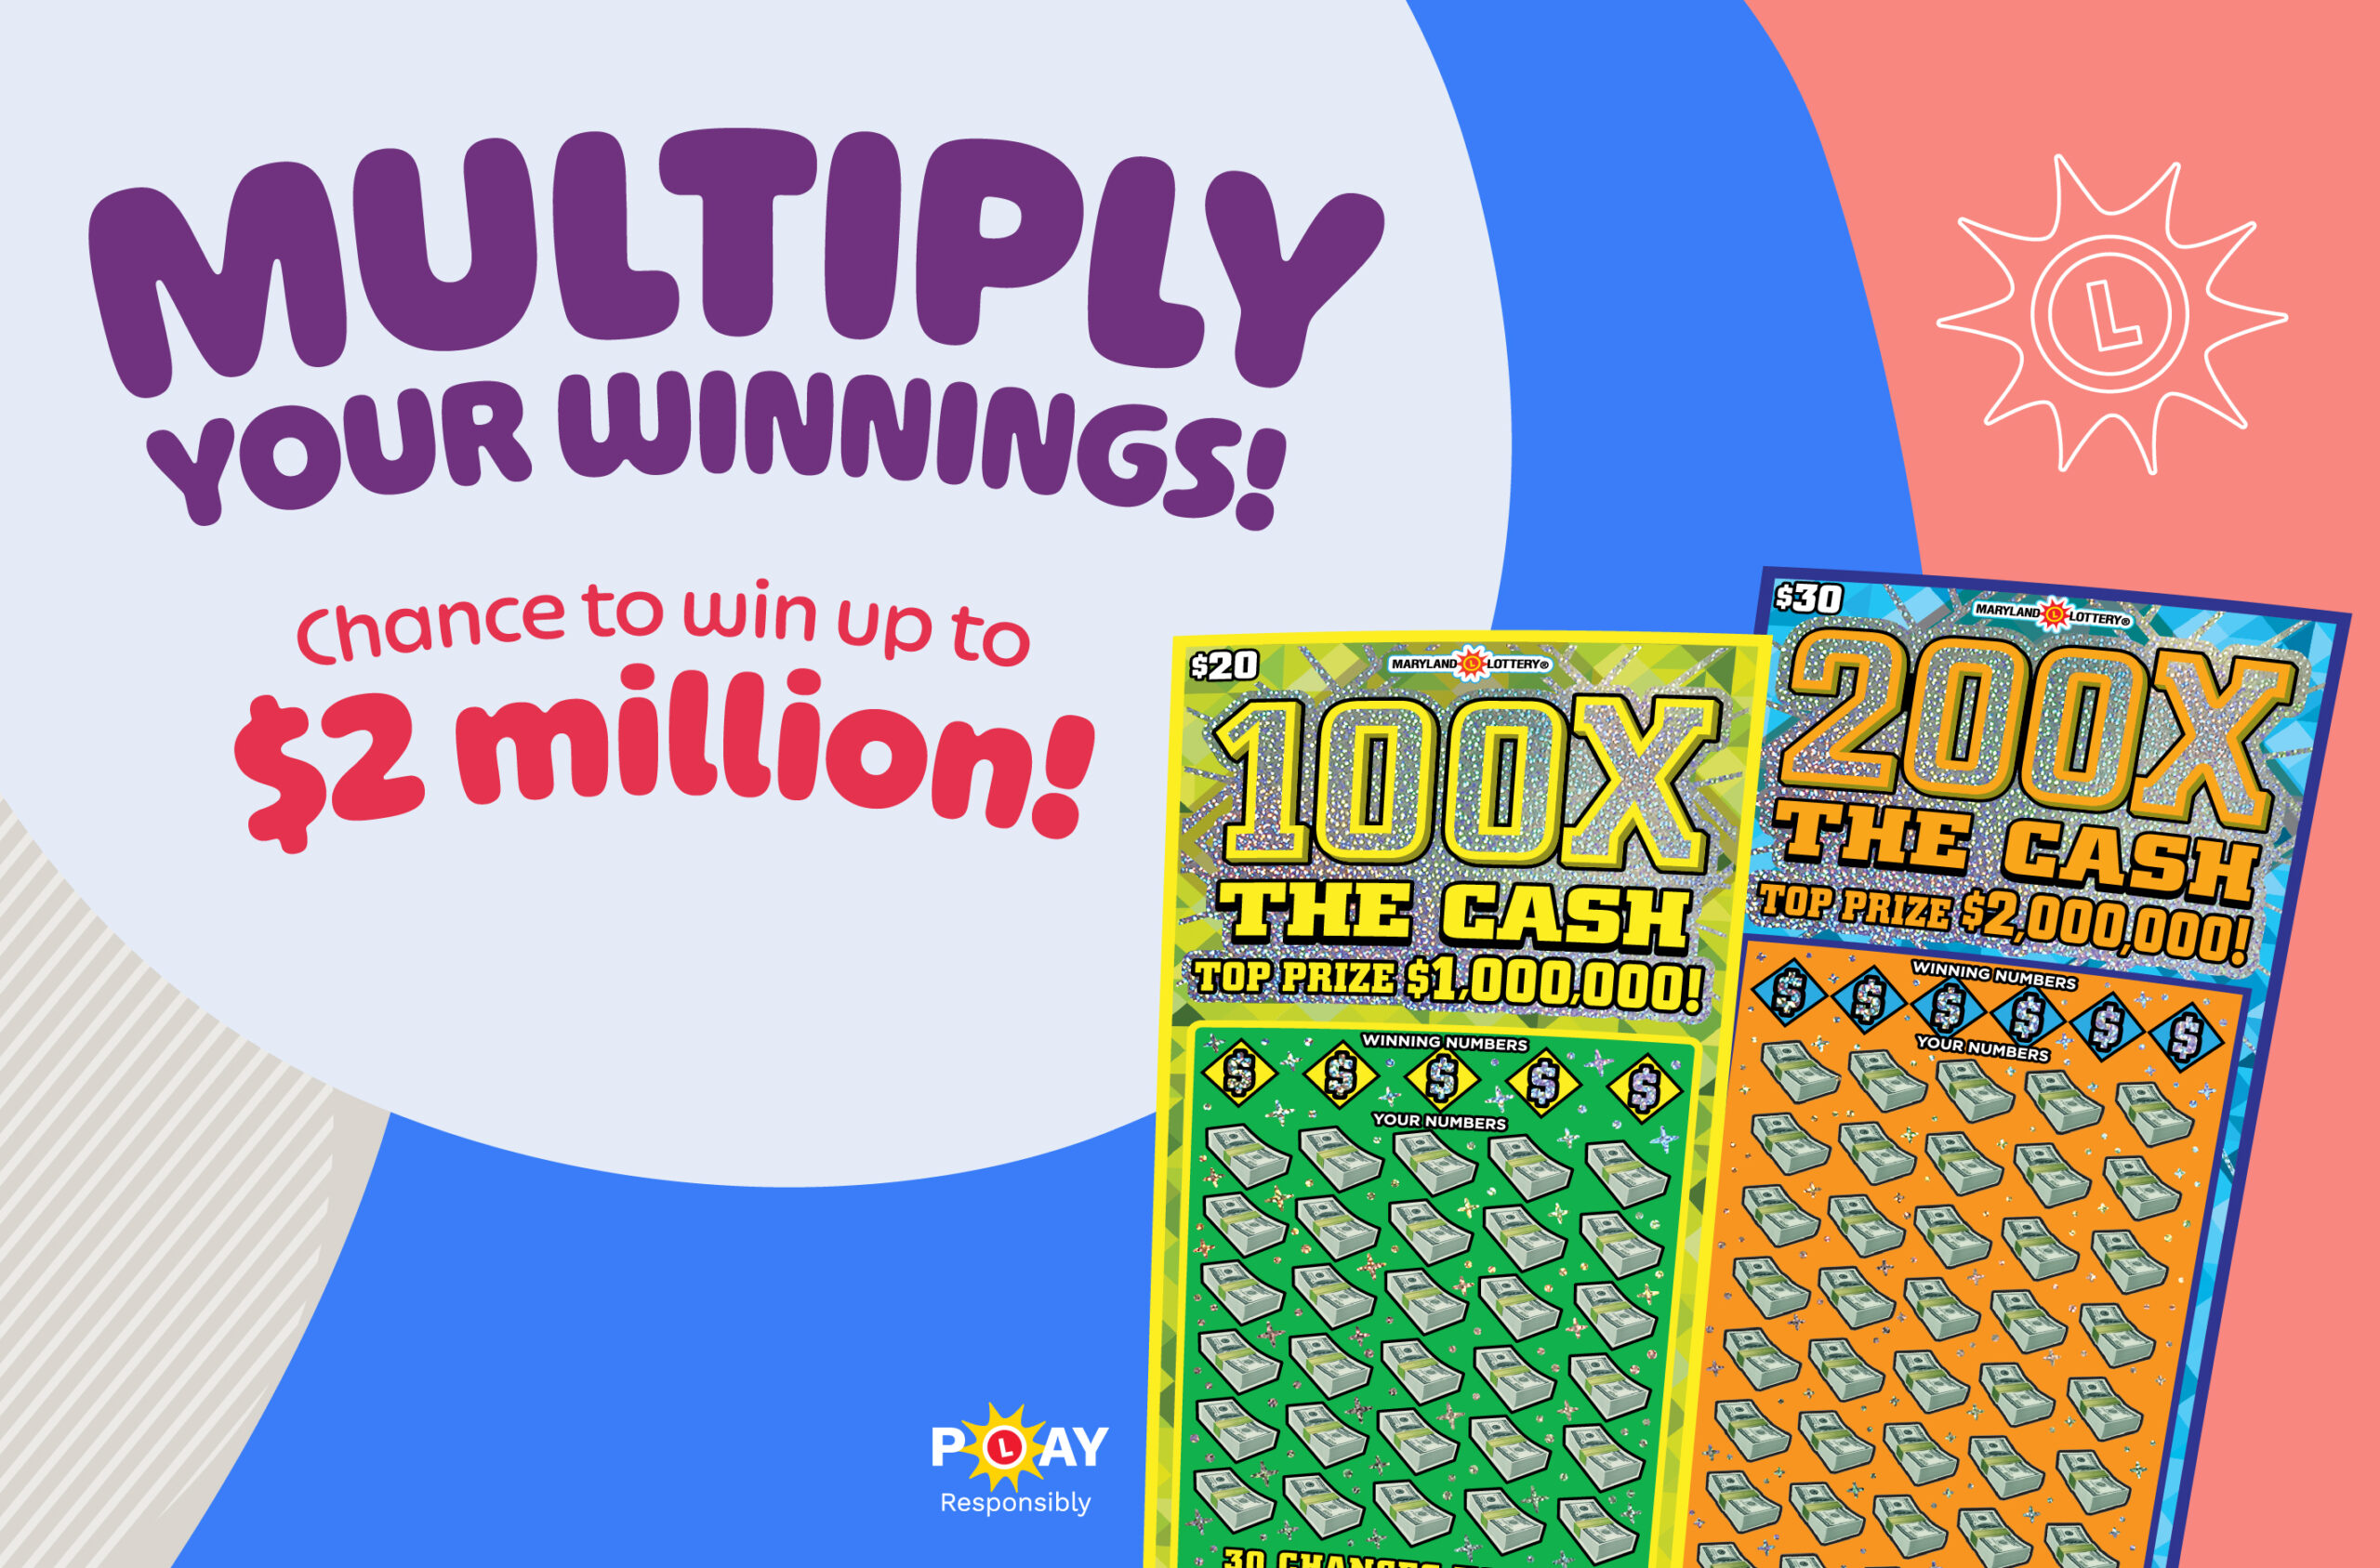 Multiply your fun by multiplying your winnings, up to 200 times for a top prize up to $2 million! Plus, enter for a second chance to win cash.